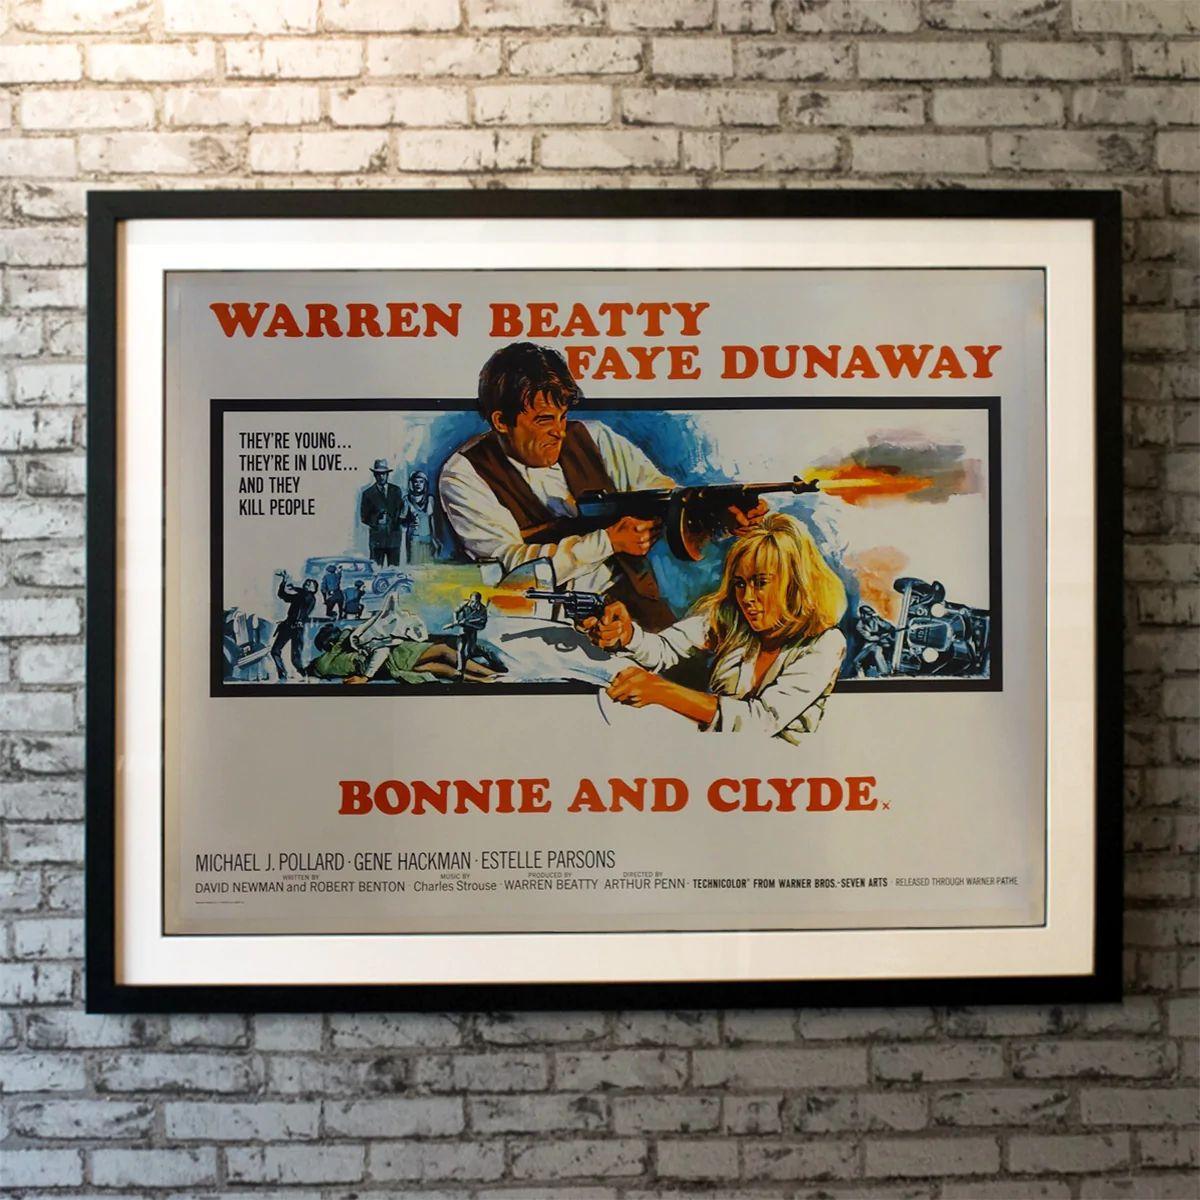 Bonnie and Clyde, Unframed Poster, 1967

Bored waitress Bonnie Parker falls in love with an ex-con named Clyde Barrow and together they start a violent crime spree through the country, stealing cars and robbing banks.

Year: 1967
Nationality: